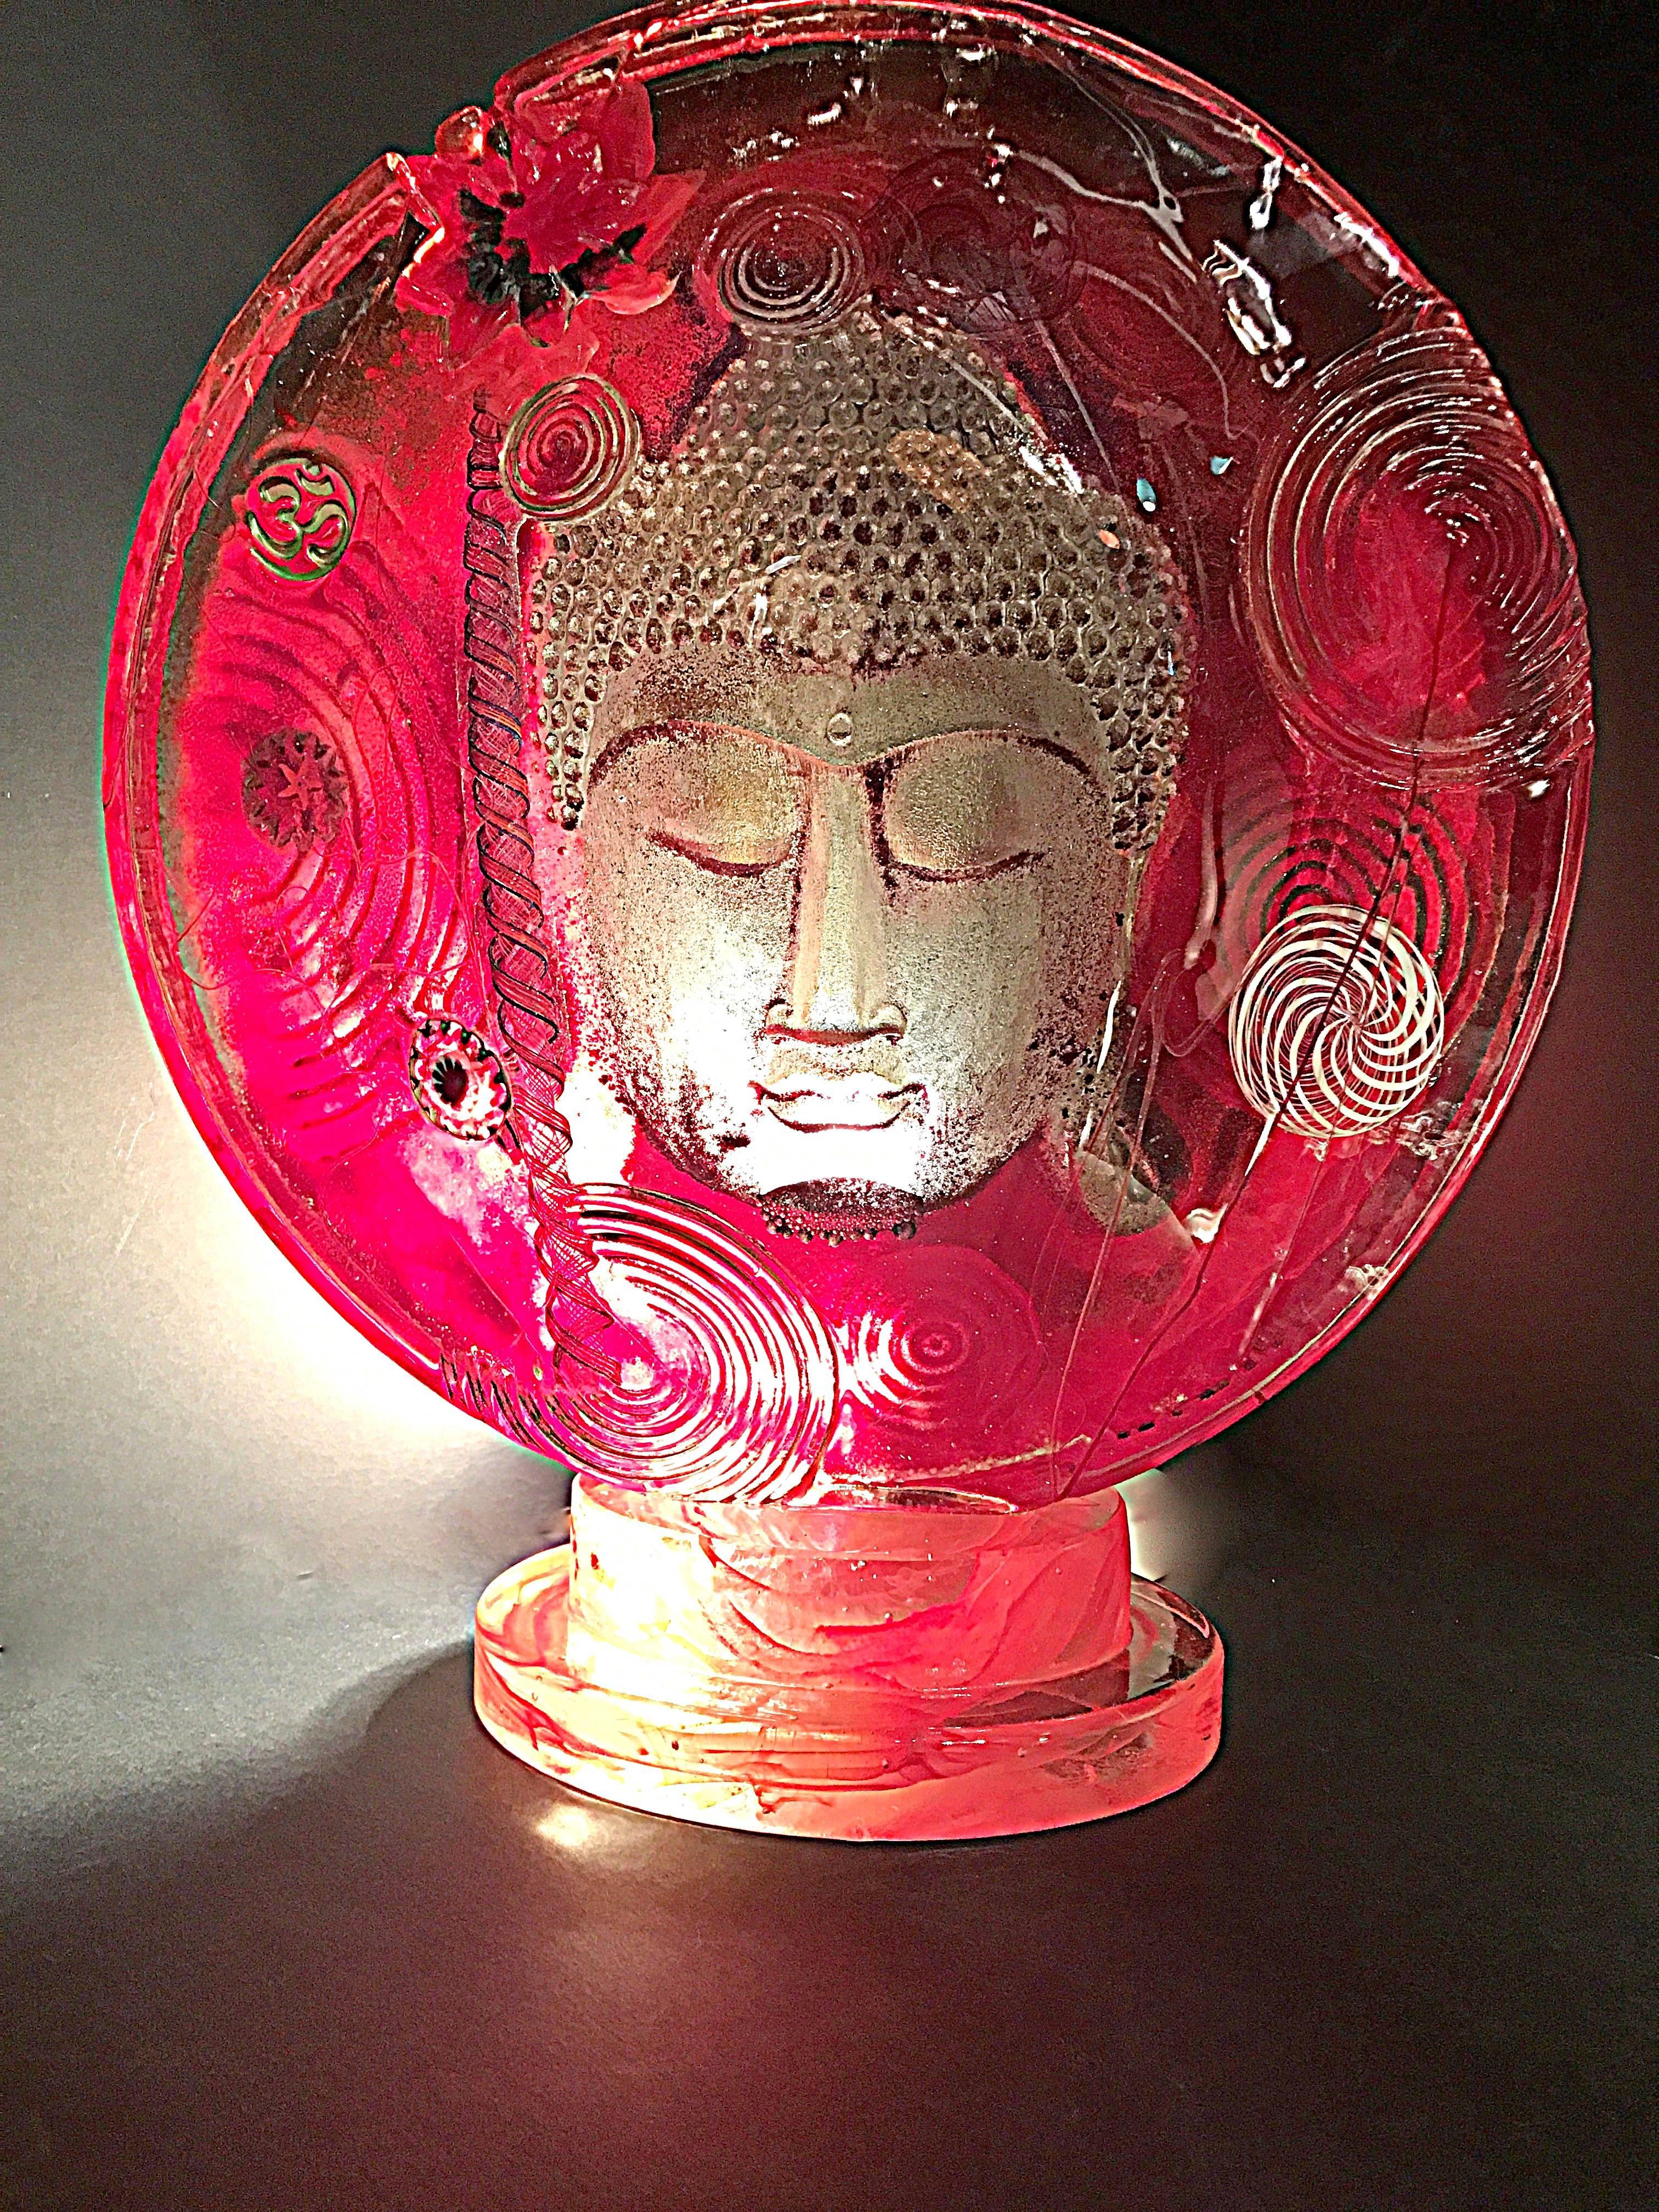 Various Faces of Buddha are depicted using very thick glass casting with layered color inclusion which creates the floating face deep in meditation. The faces are dusted with silver or gold leaf which gives a gorgeous glow to each piece. 
Large